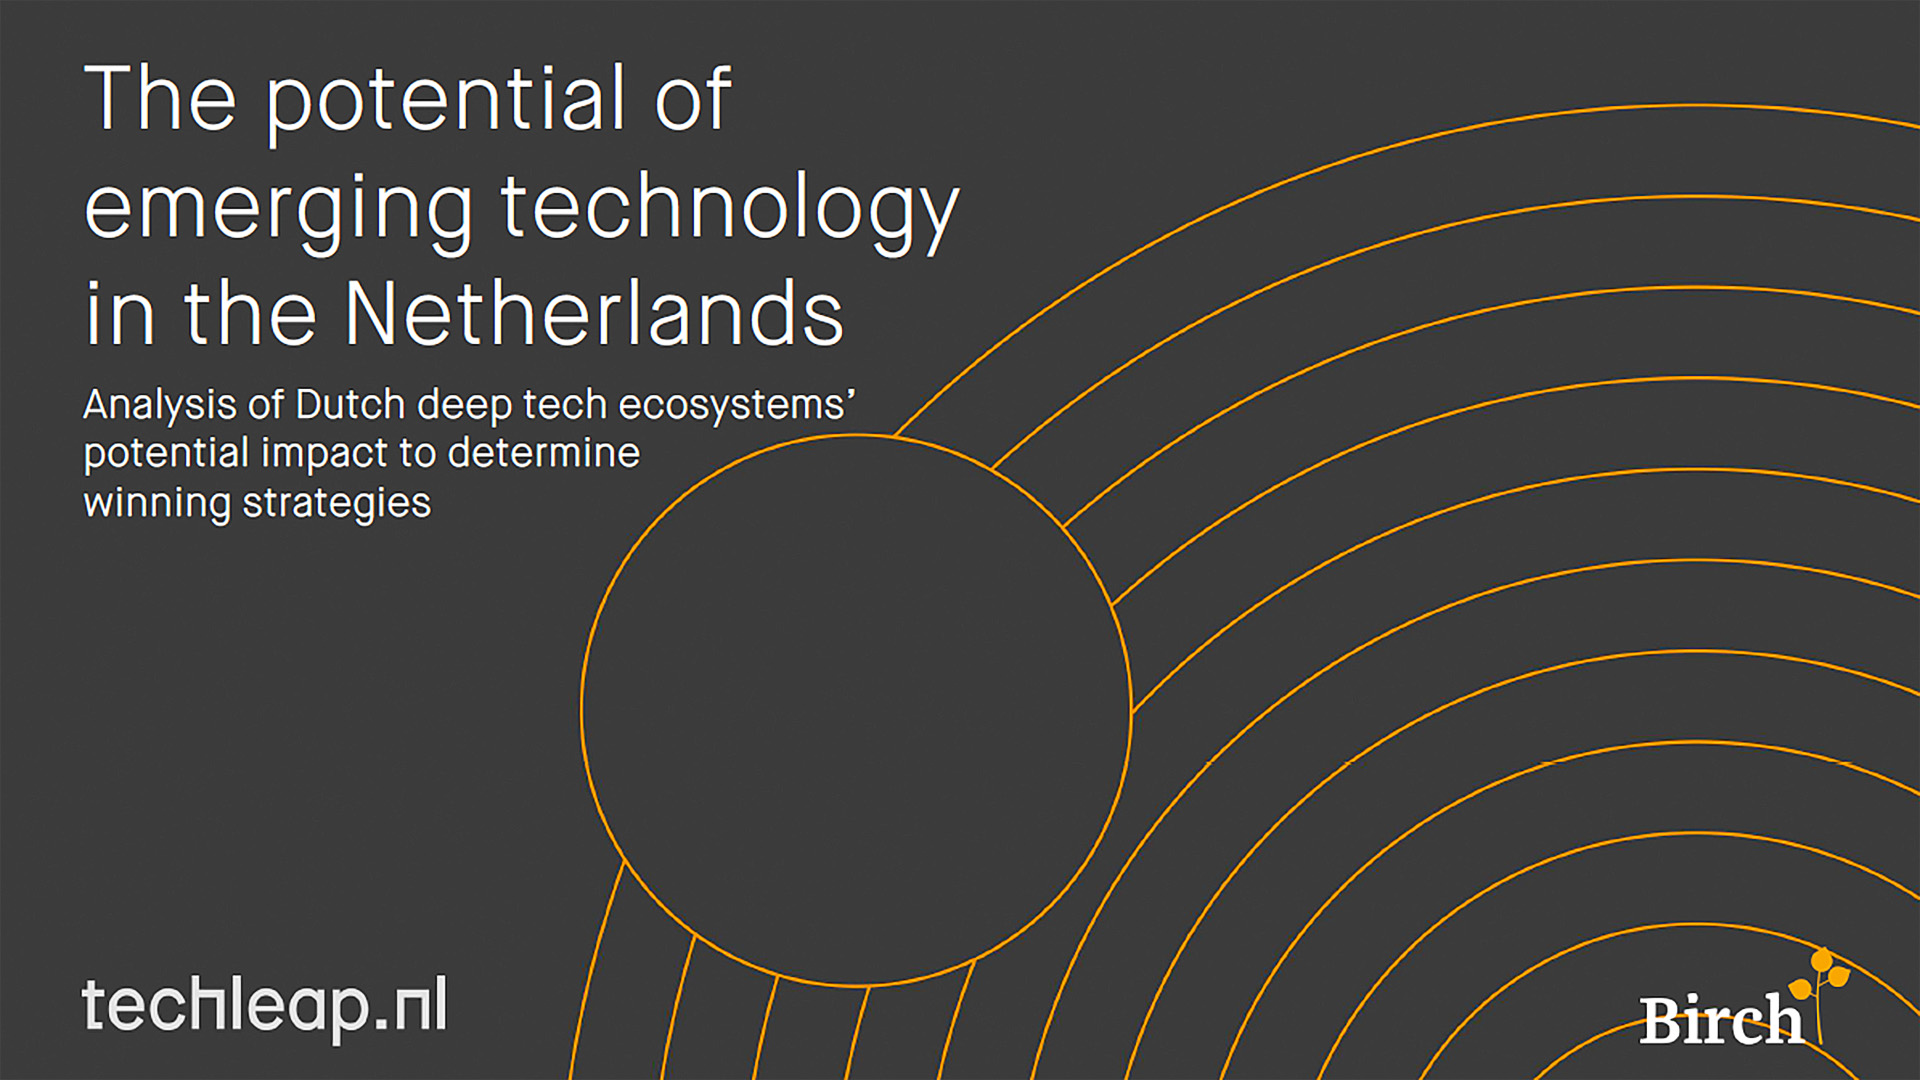 The potential of emerging technology in the Netherlands